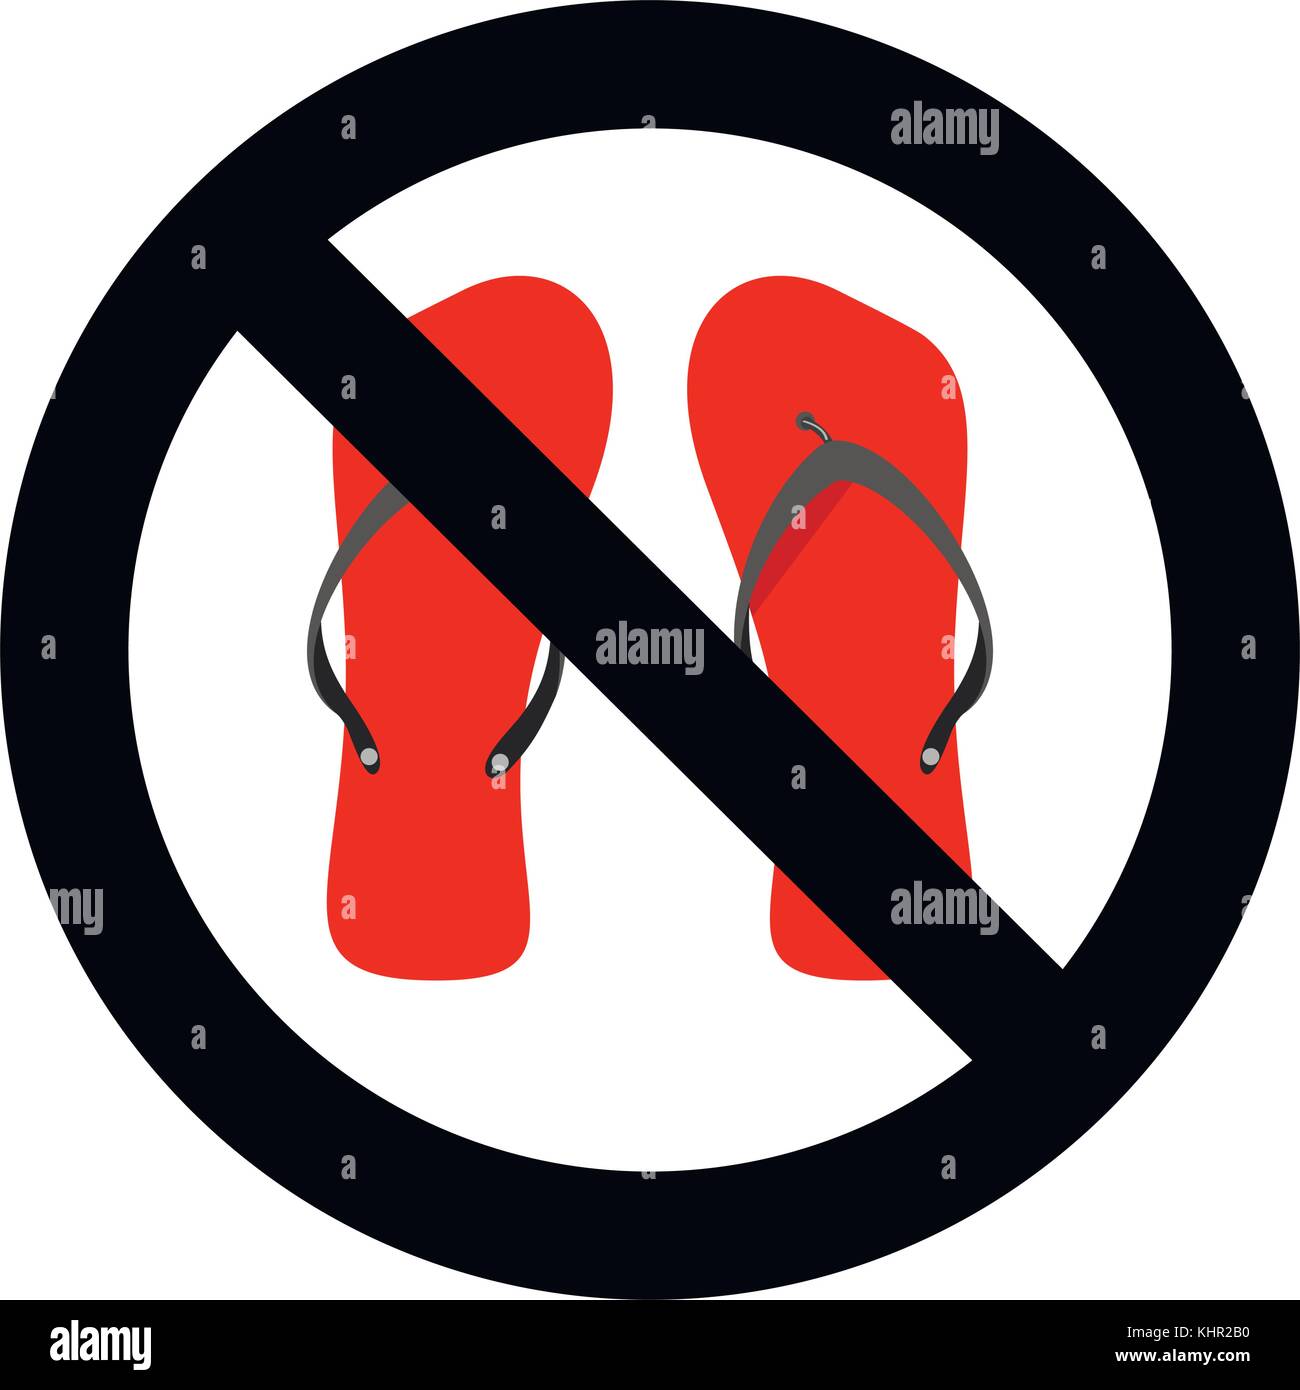 466 No Slippers Sign Images, Stock Photos & Vectors | Shutterstock